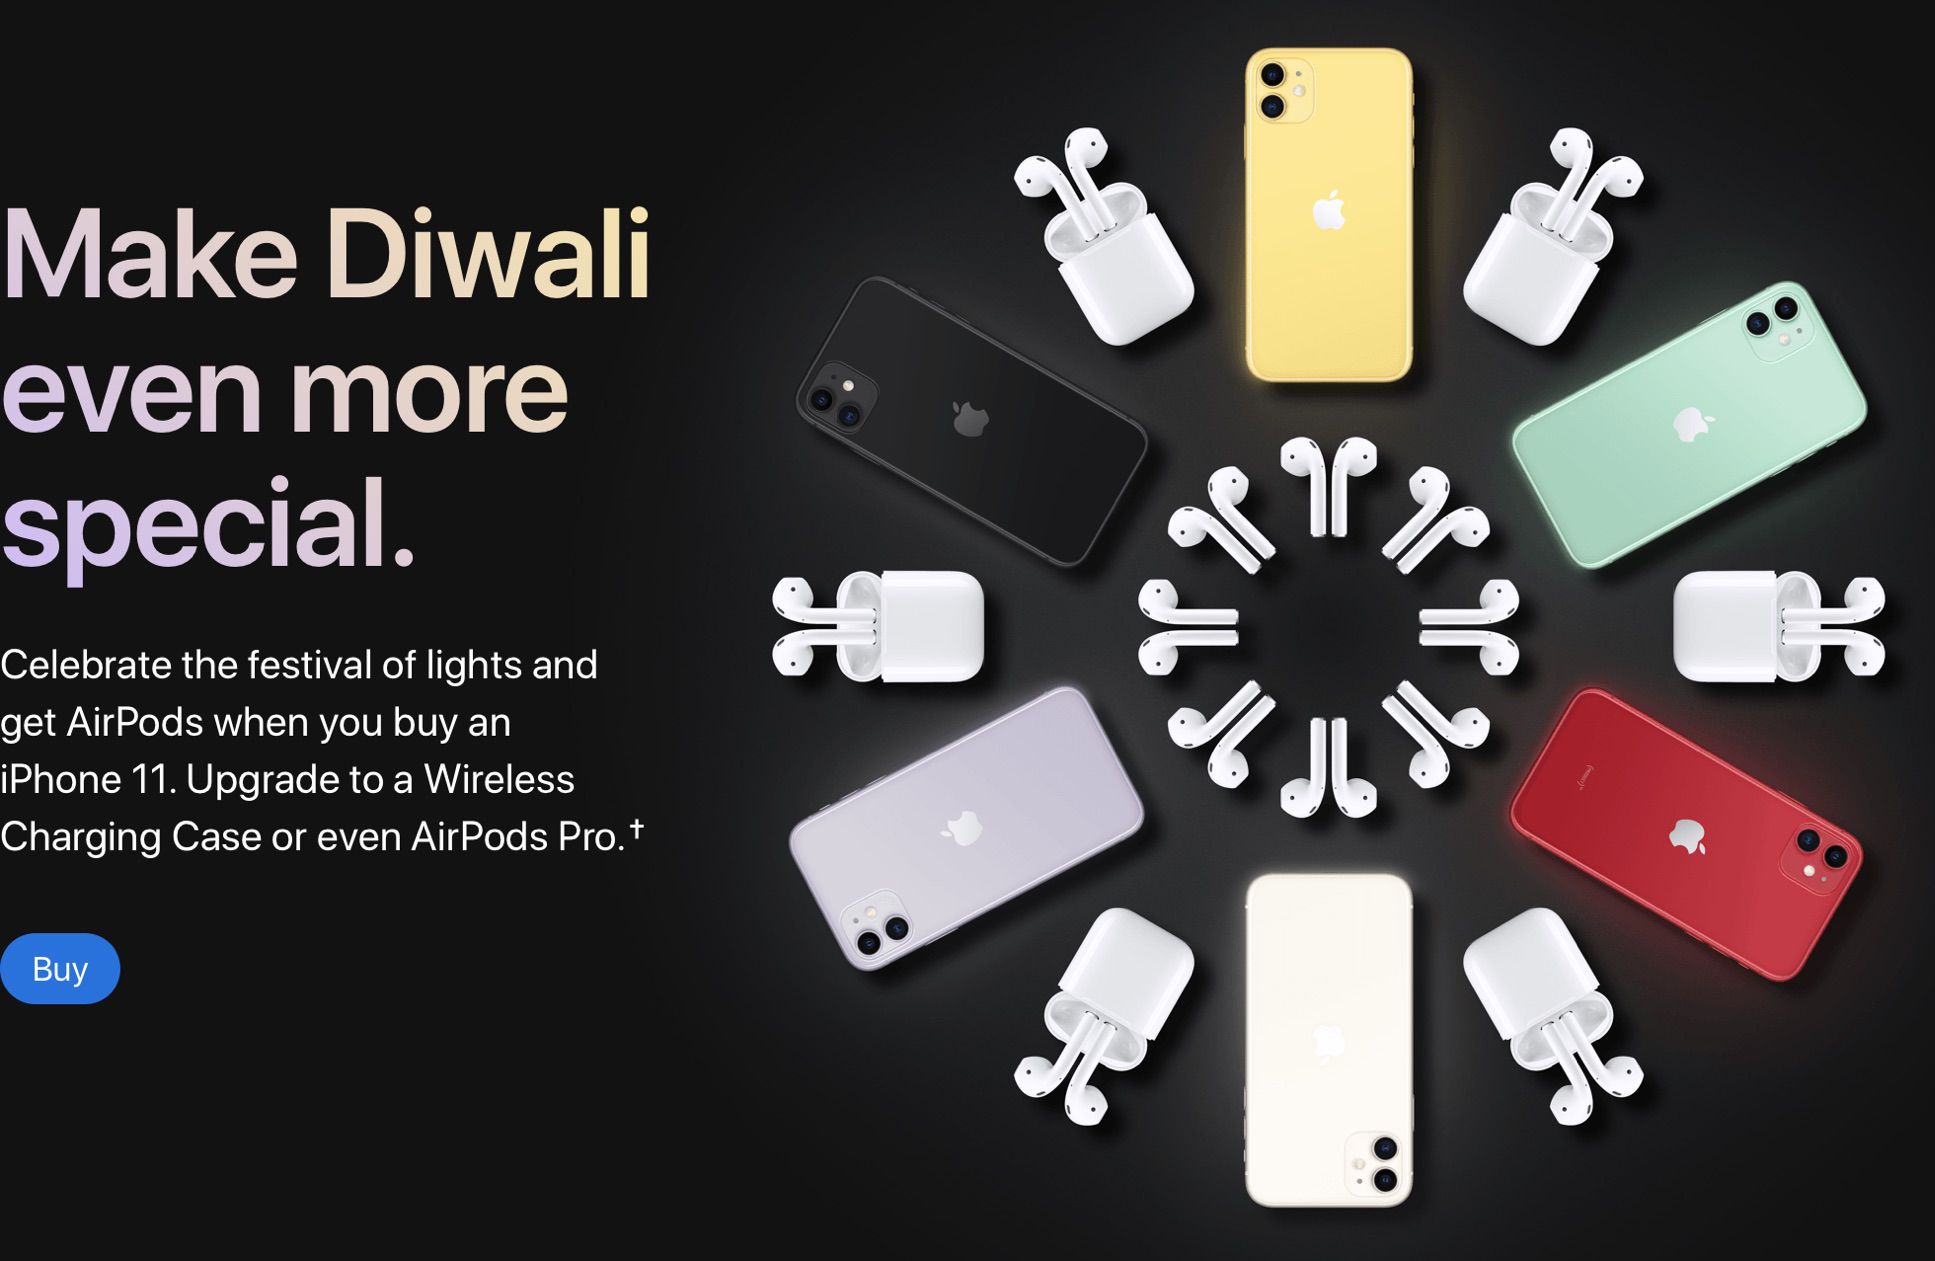 Apple Offering Free Airpods With Iphone 11 Purchase In India As Part Of Diwali Celebration Macrumors